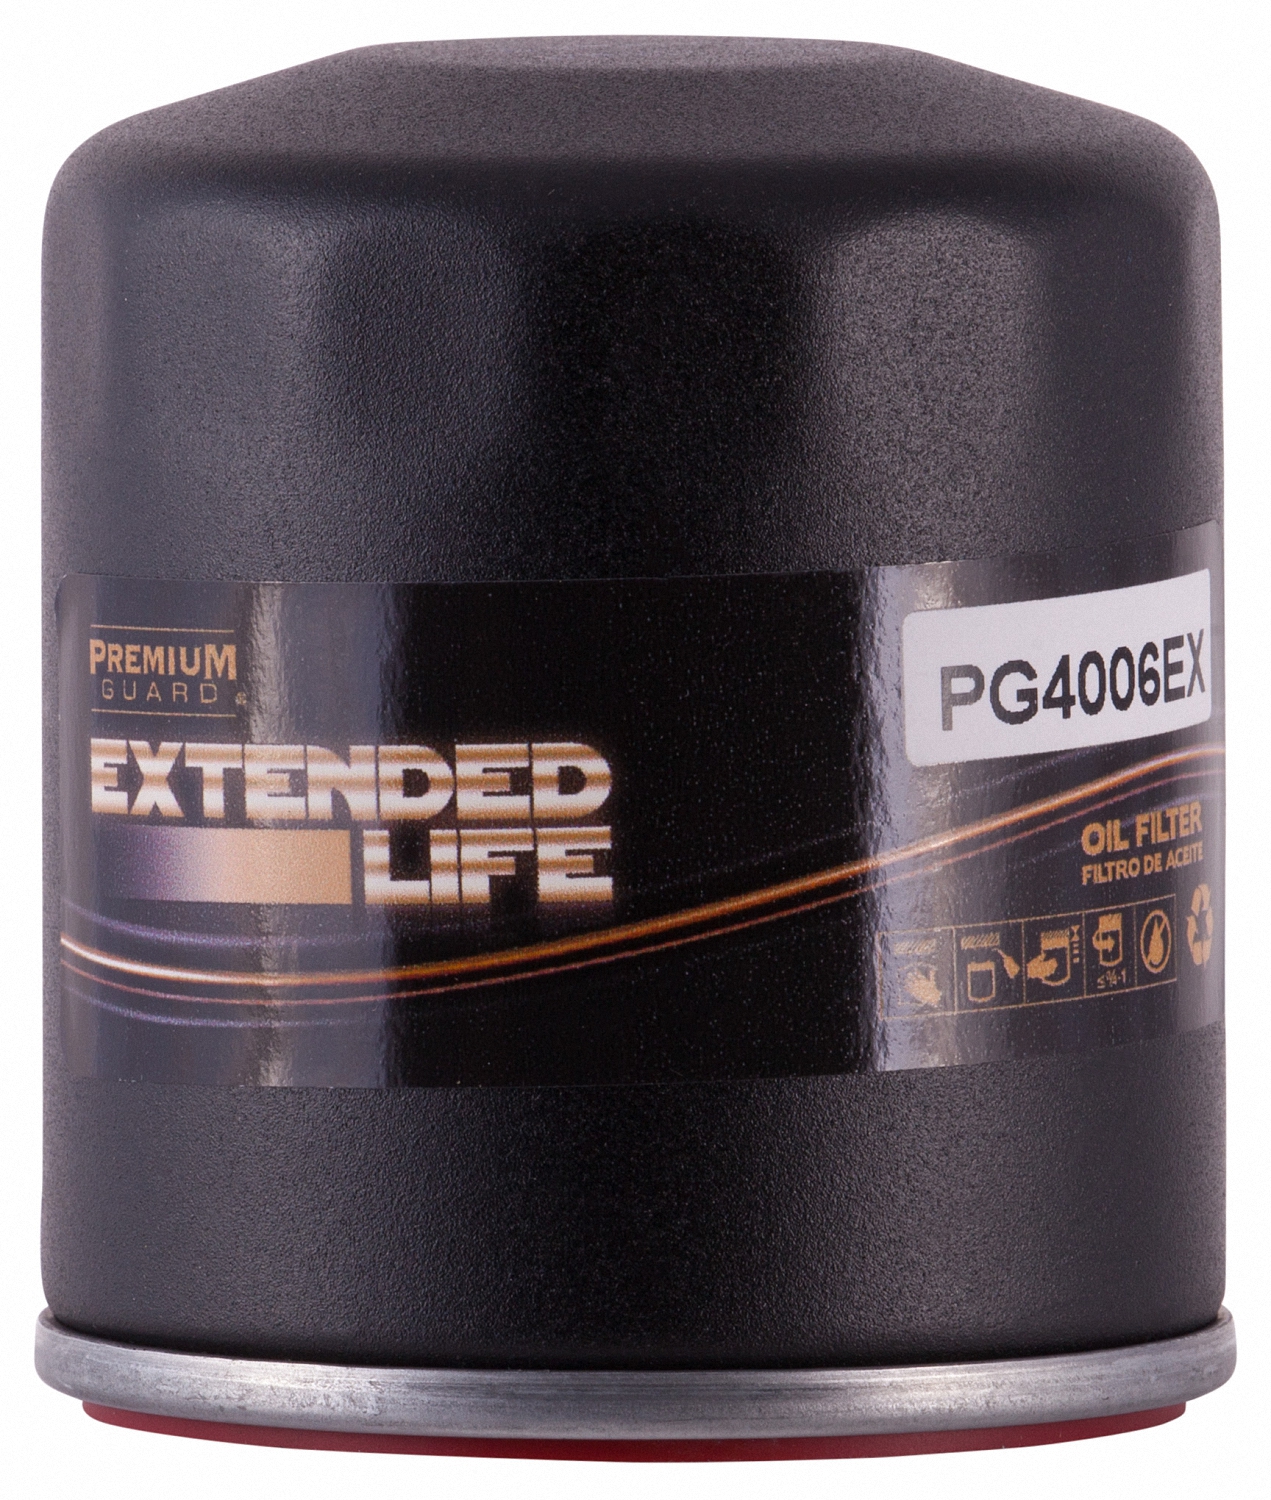 PG4006EX Extended Life Oil Filter up to 10,000 Miles | Fits 2012-1975 Chevrolet, GMC, Hummer, Cadillac, Pontiac, Oldsmobile, Isuzu, Buick, Saab, Workhorse Custom Chassis, Avanti - image 2 of 5